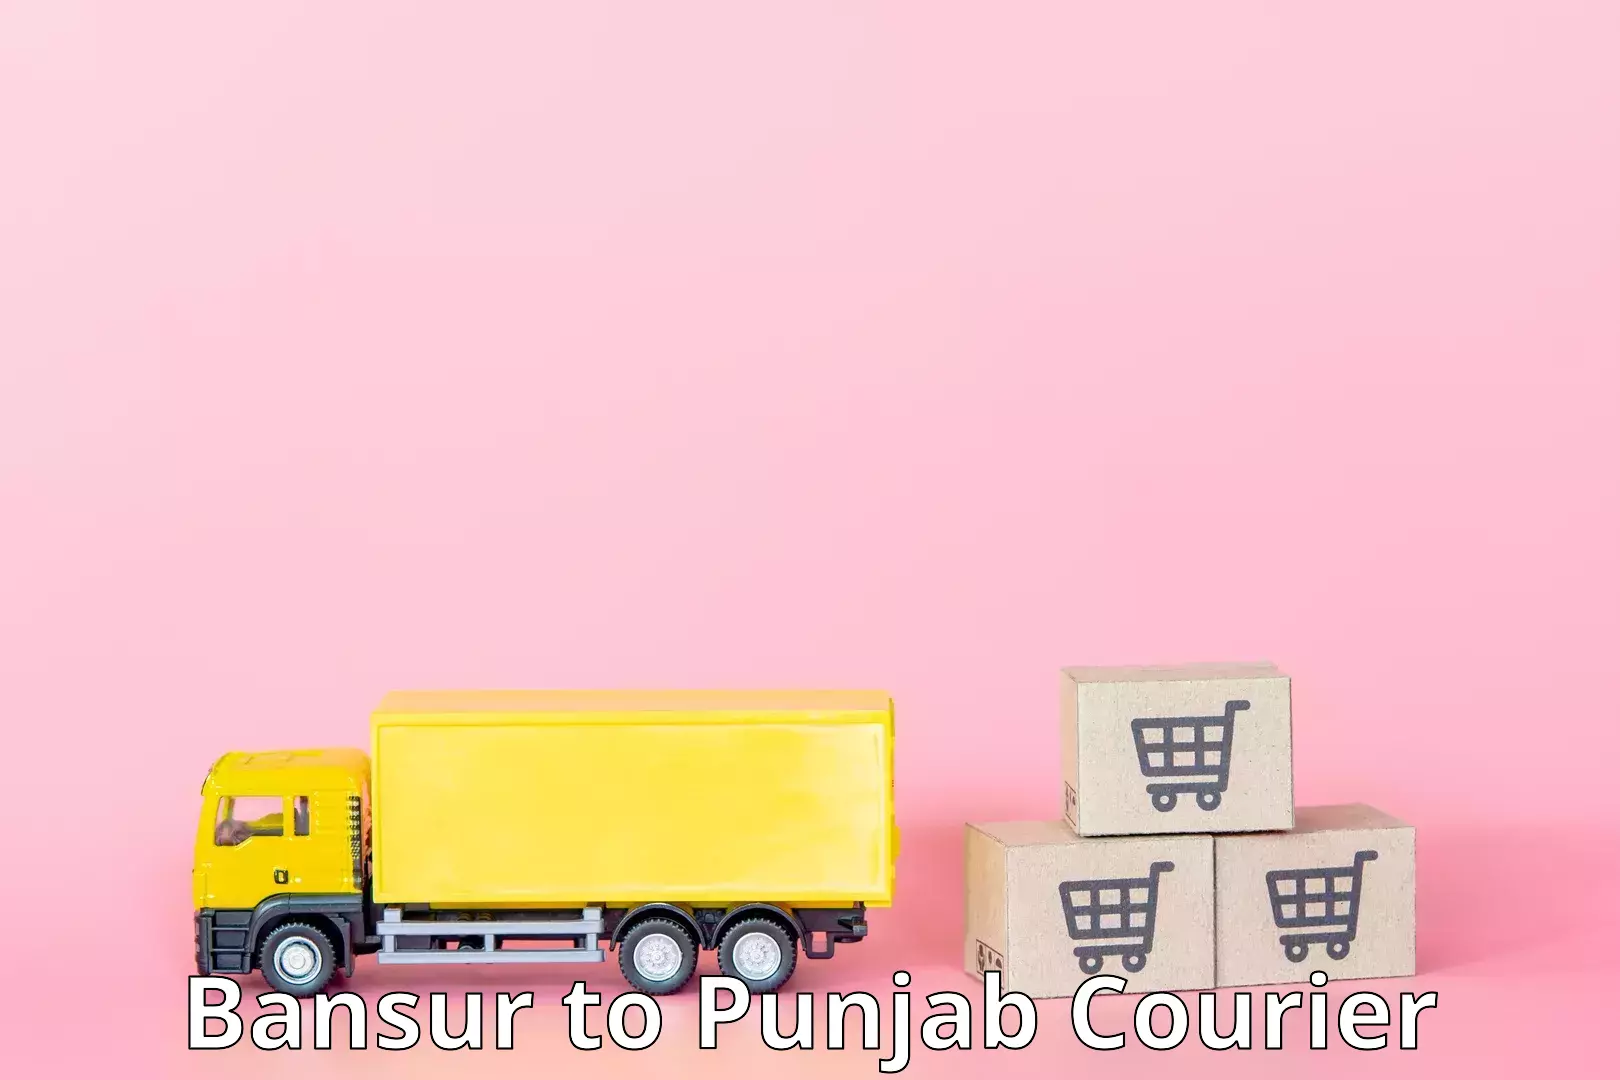 Nationwide delivery network Bansur to Amritsar